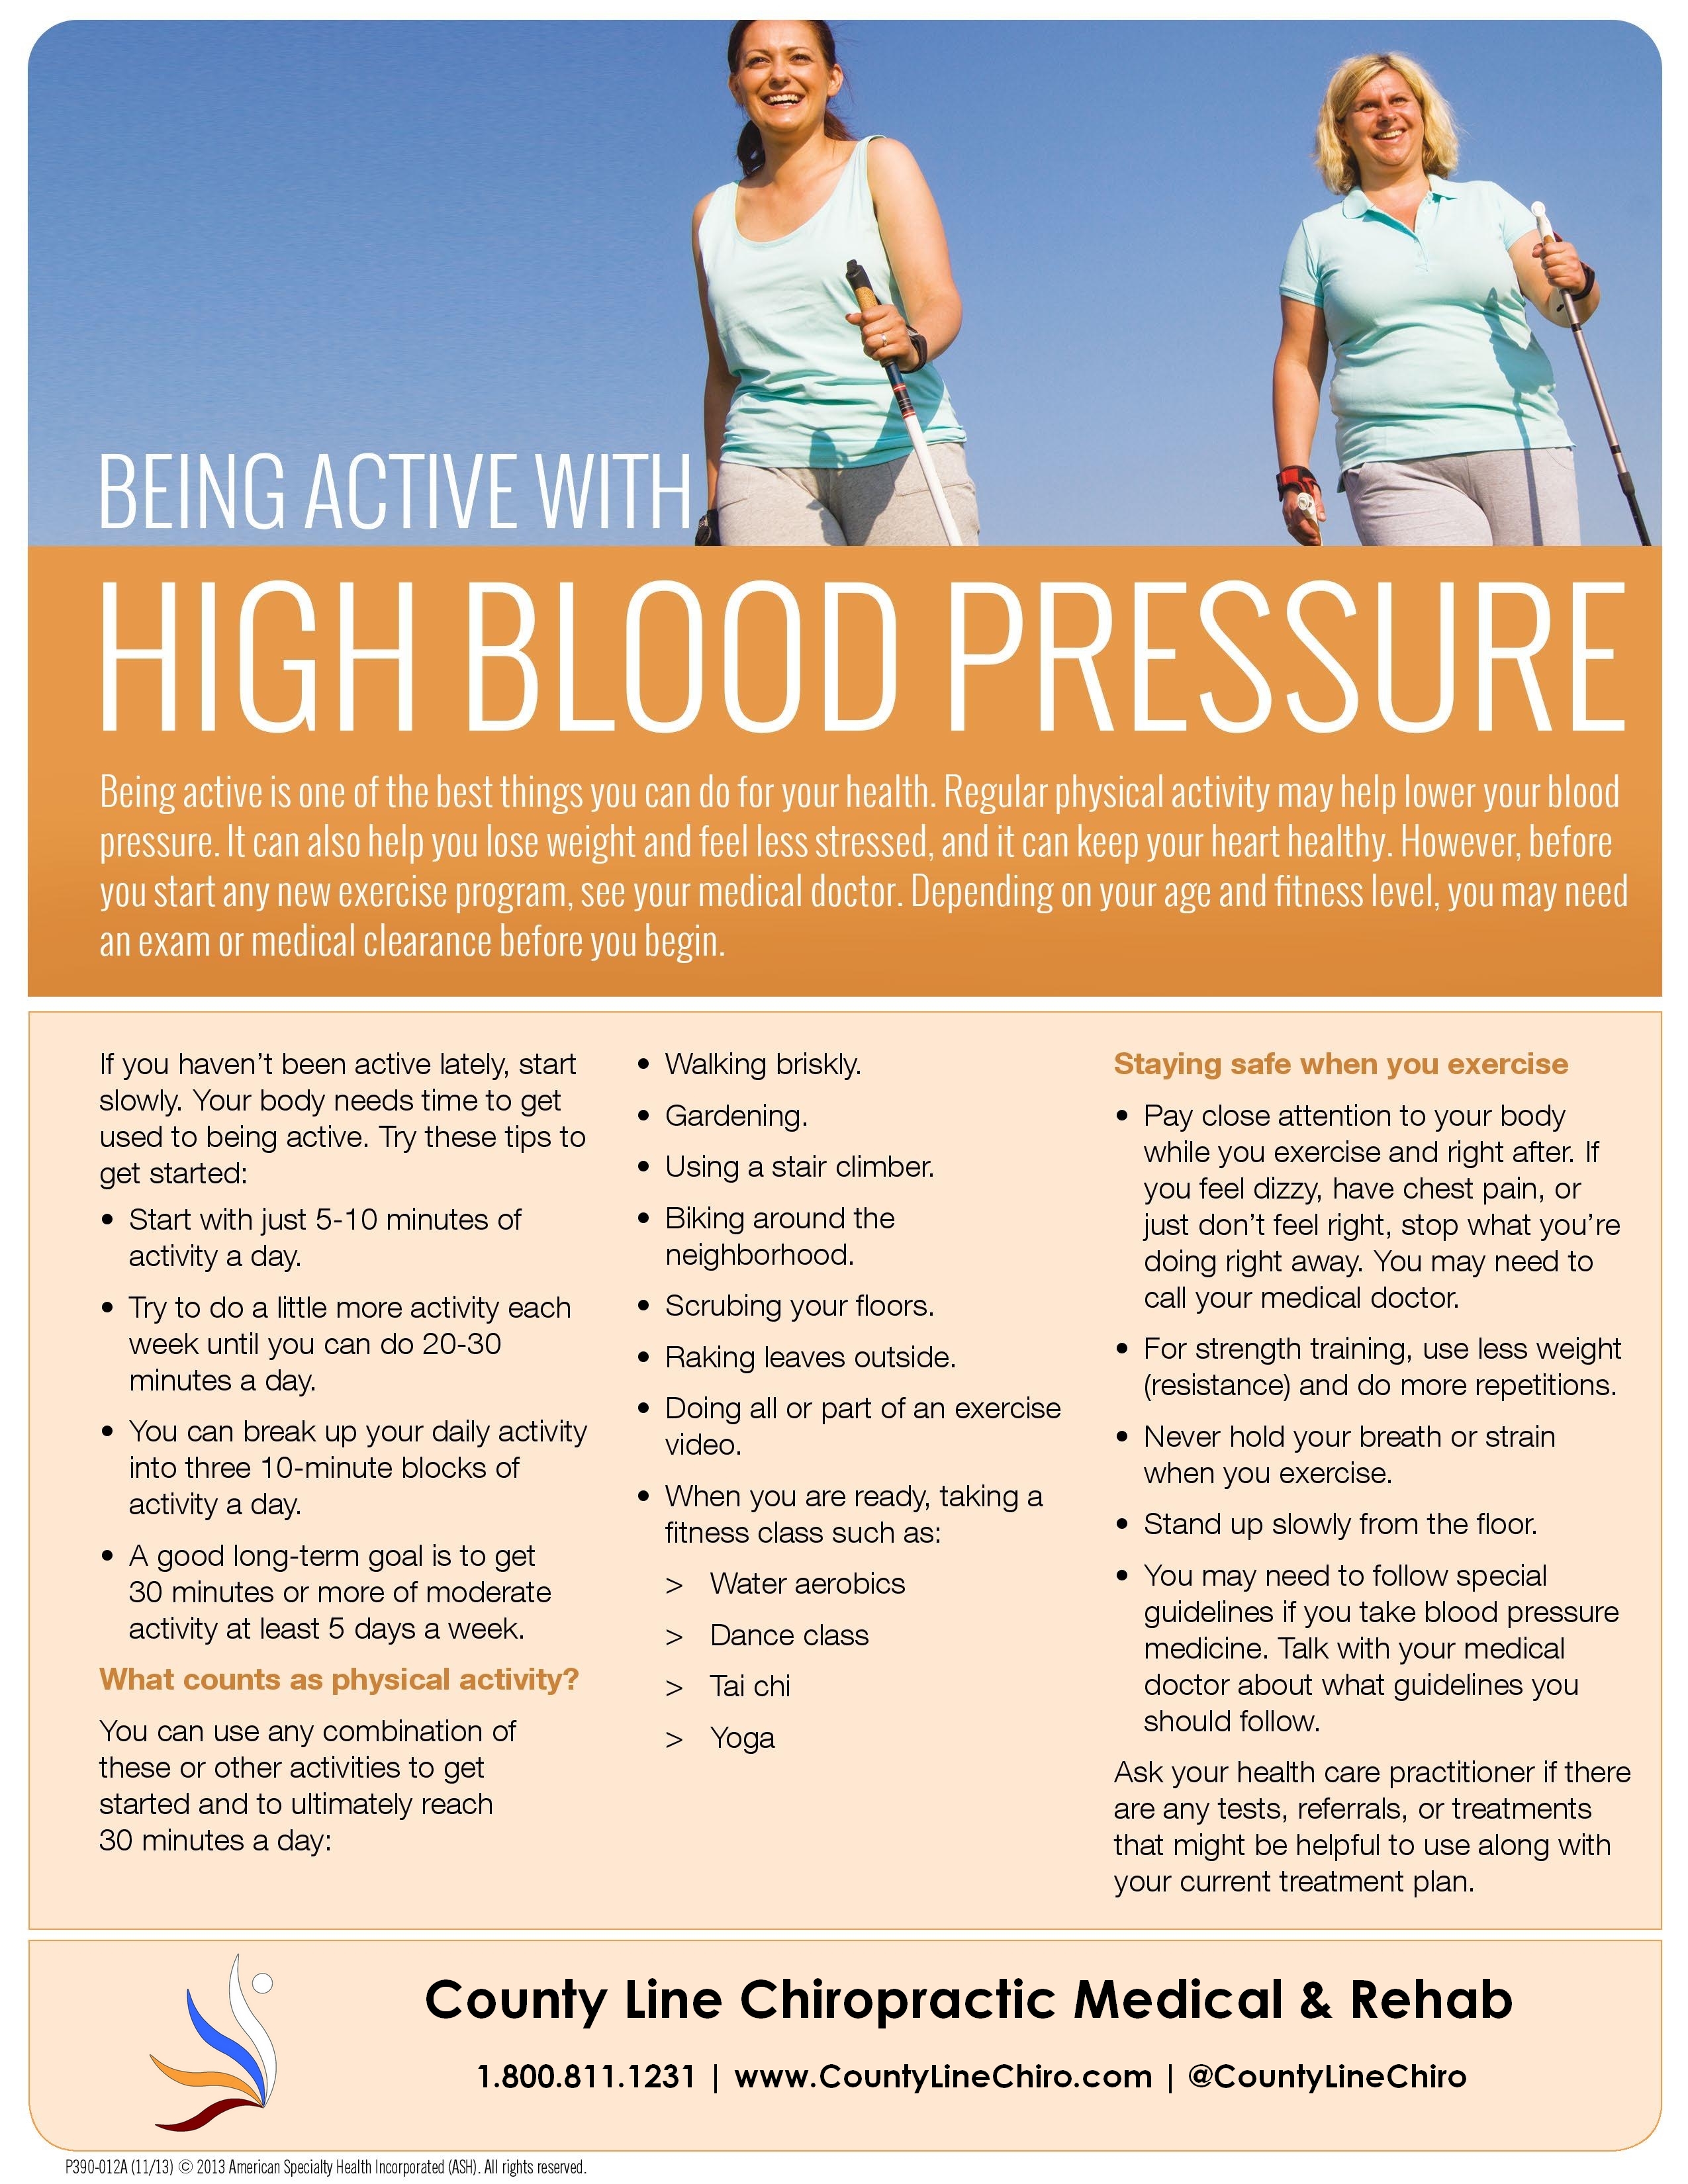 Being Active With High Blood Pressure